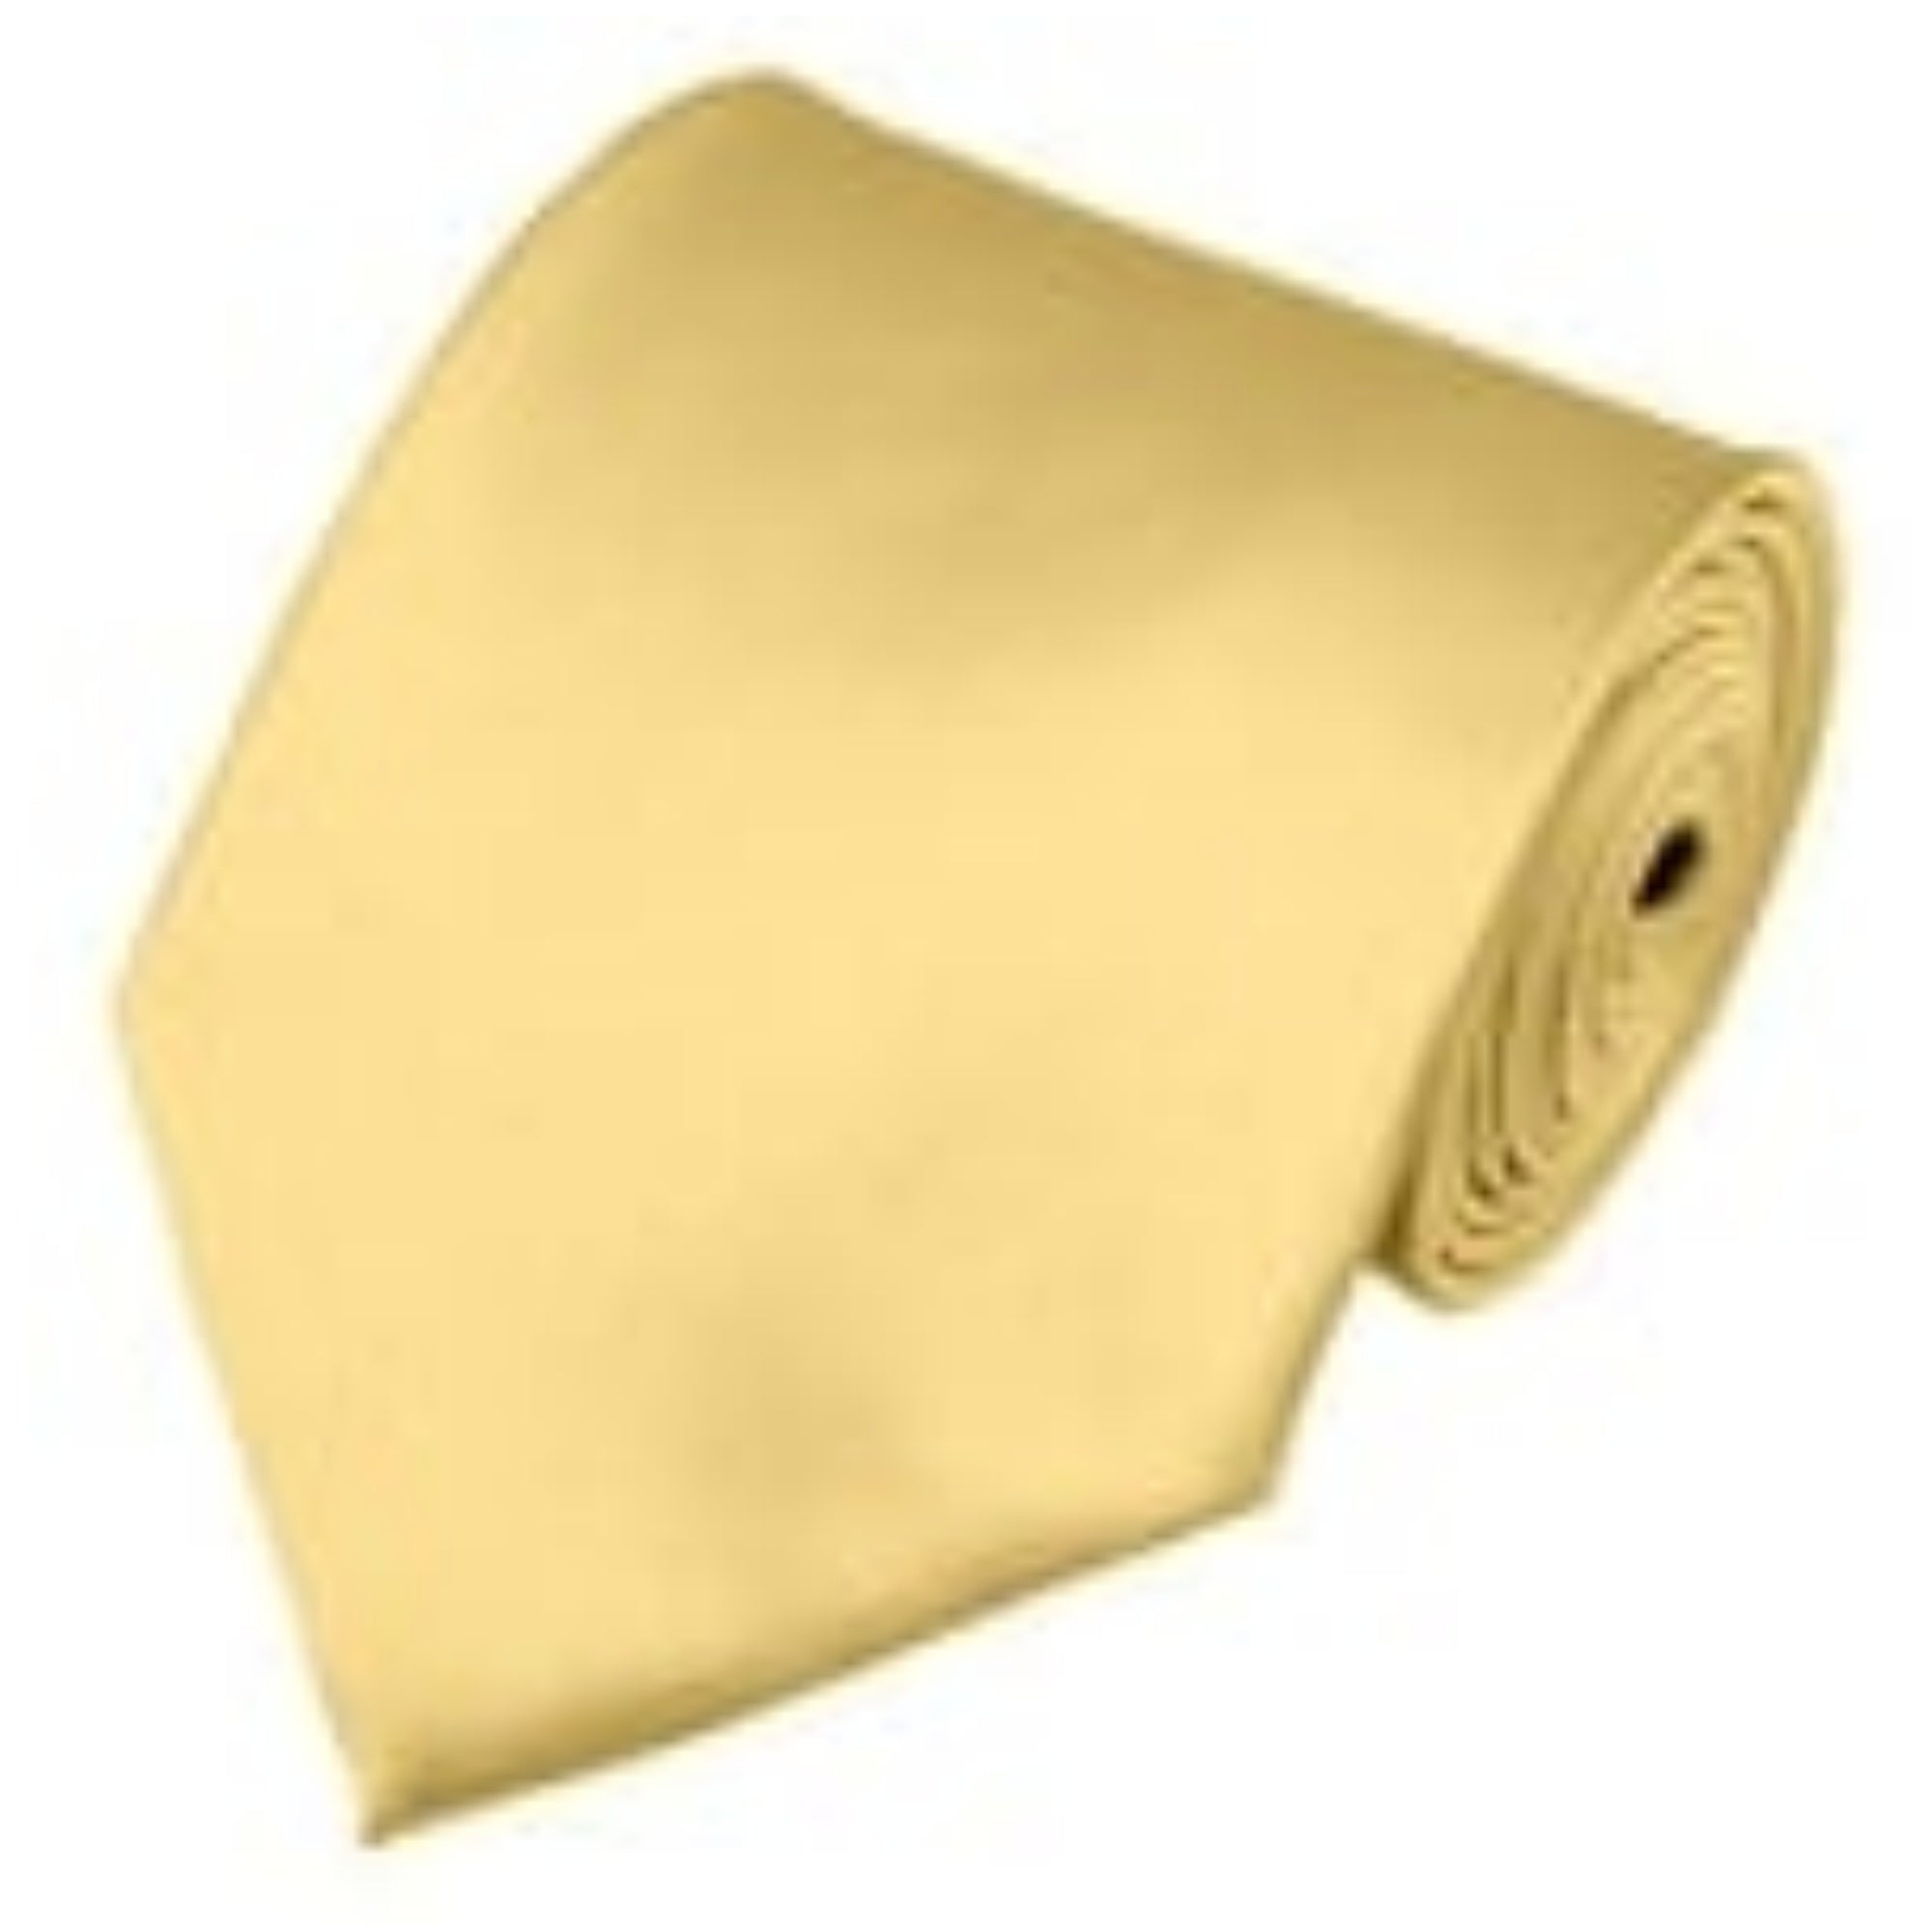 TheDapperTie Solid Color 3.5 Inch Wide And 62 Inch Extra Long Necktie For Big & Tall Men Neck Tie TheDapperTie Light Yellow  